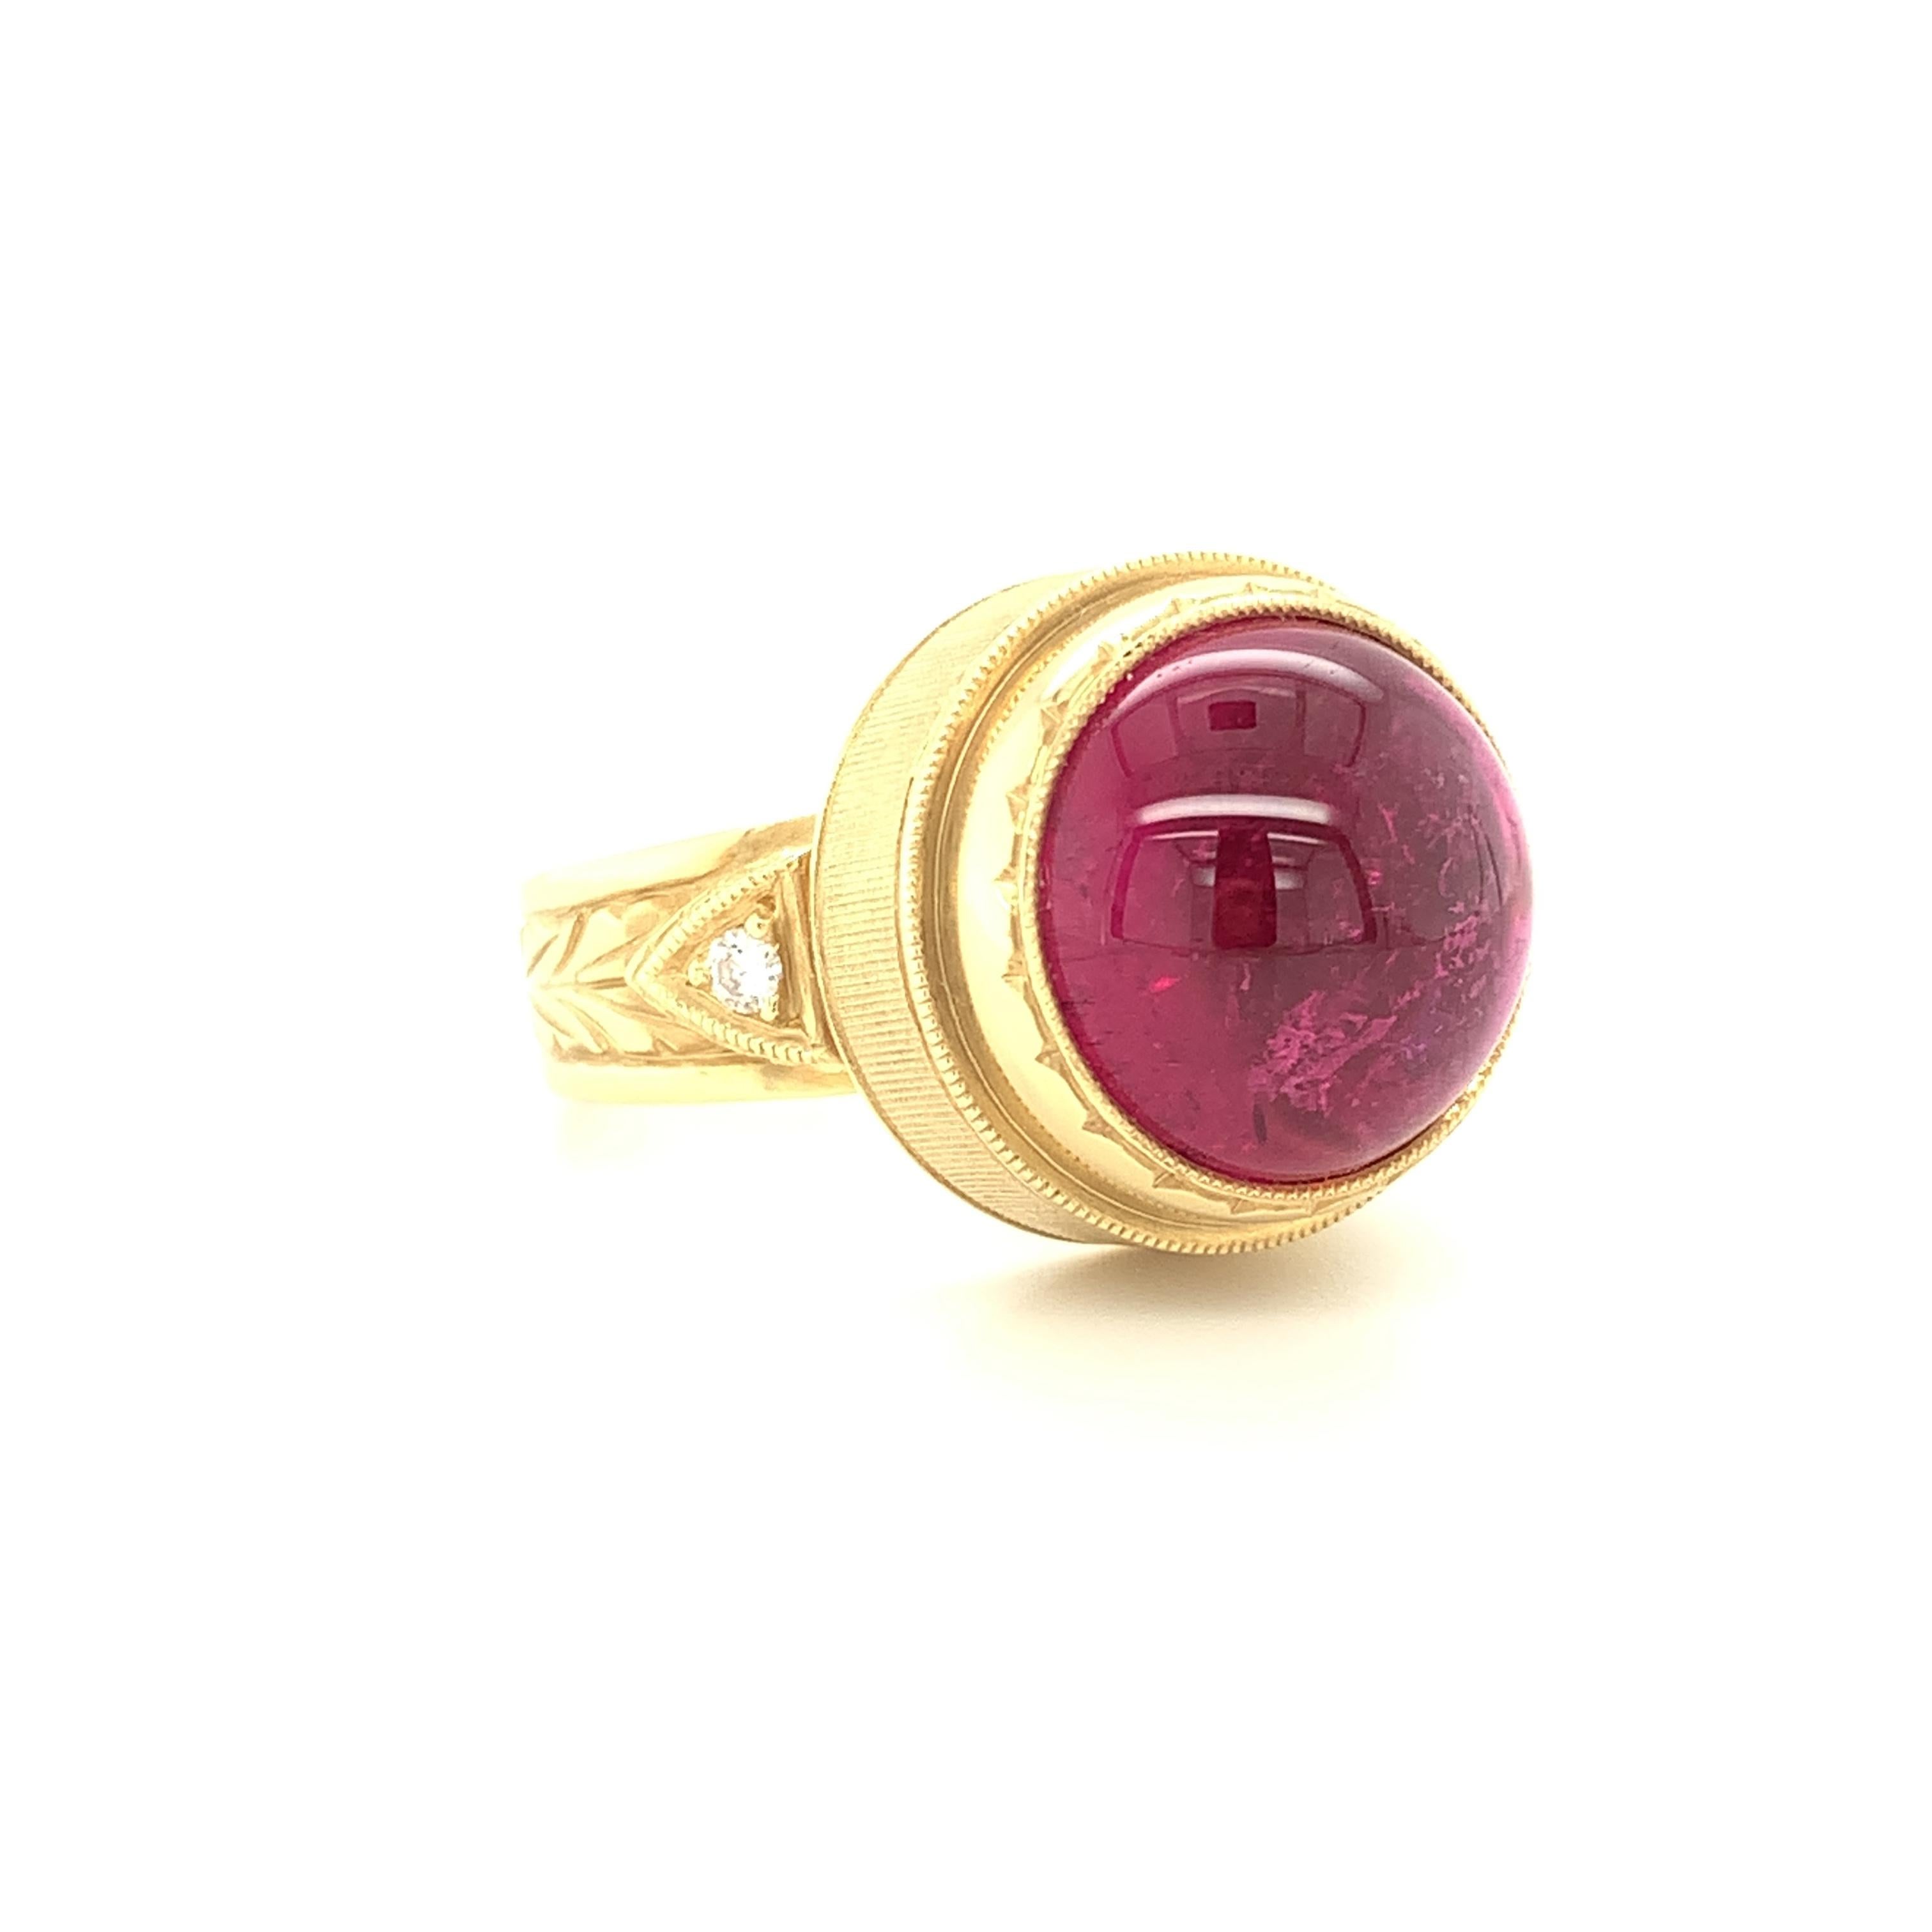 Artisan 10.75 Carat Rubellite Tourmaline Cabochon and Diamond Engraved Band Ring  For Sale